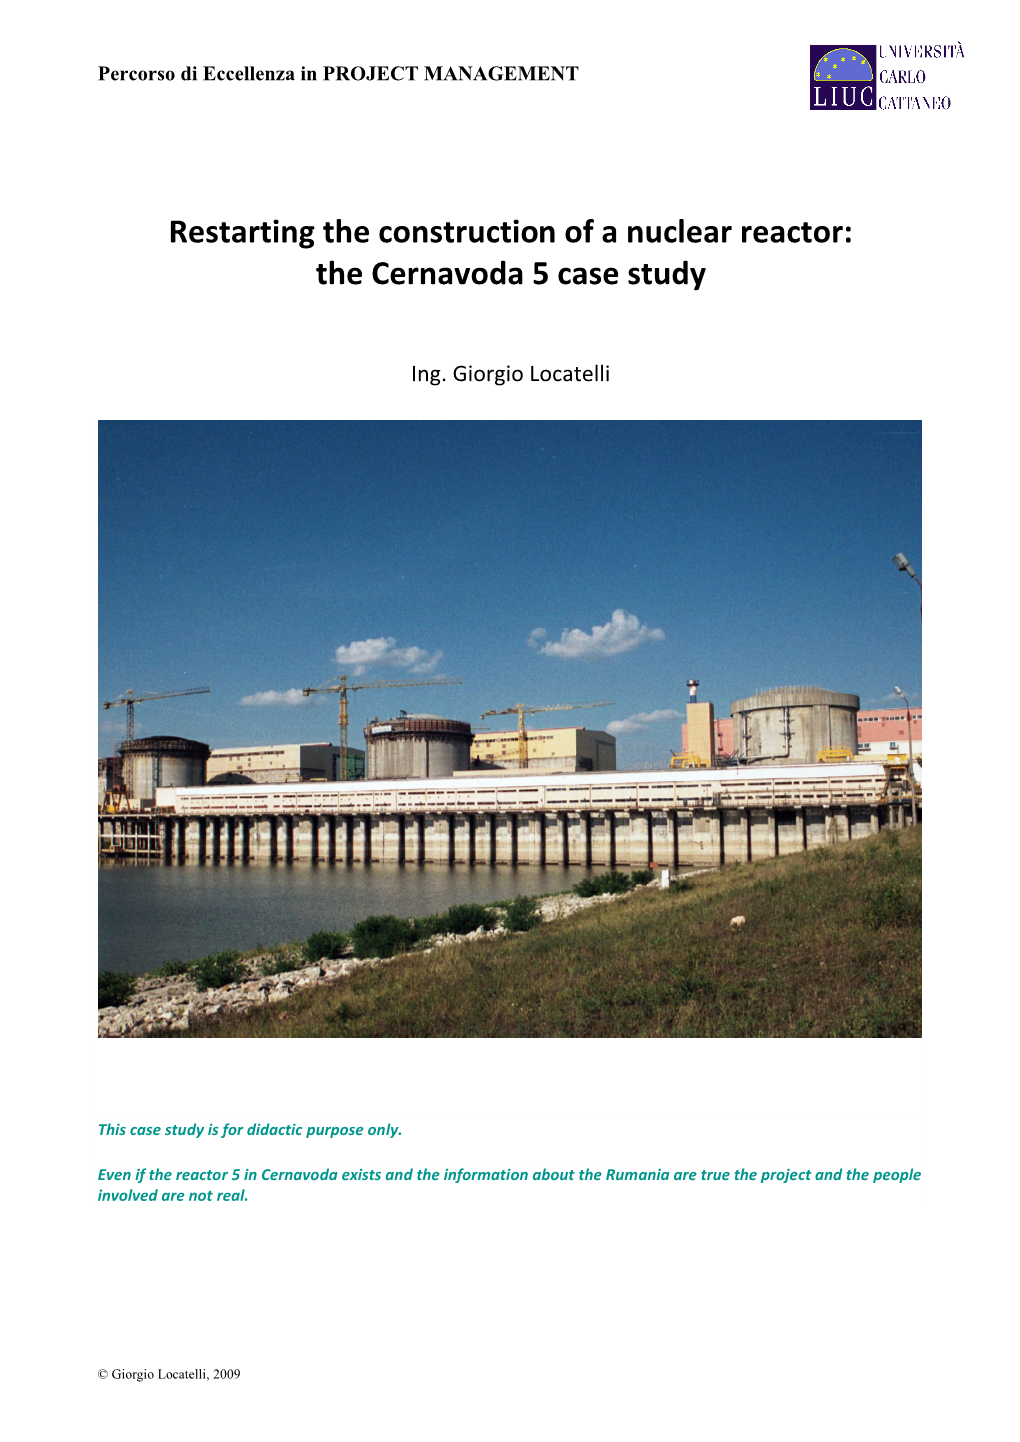 Restarting the Construction of a Nuclear Reactor: the Cernavoda 5 Case Study